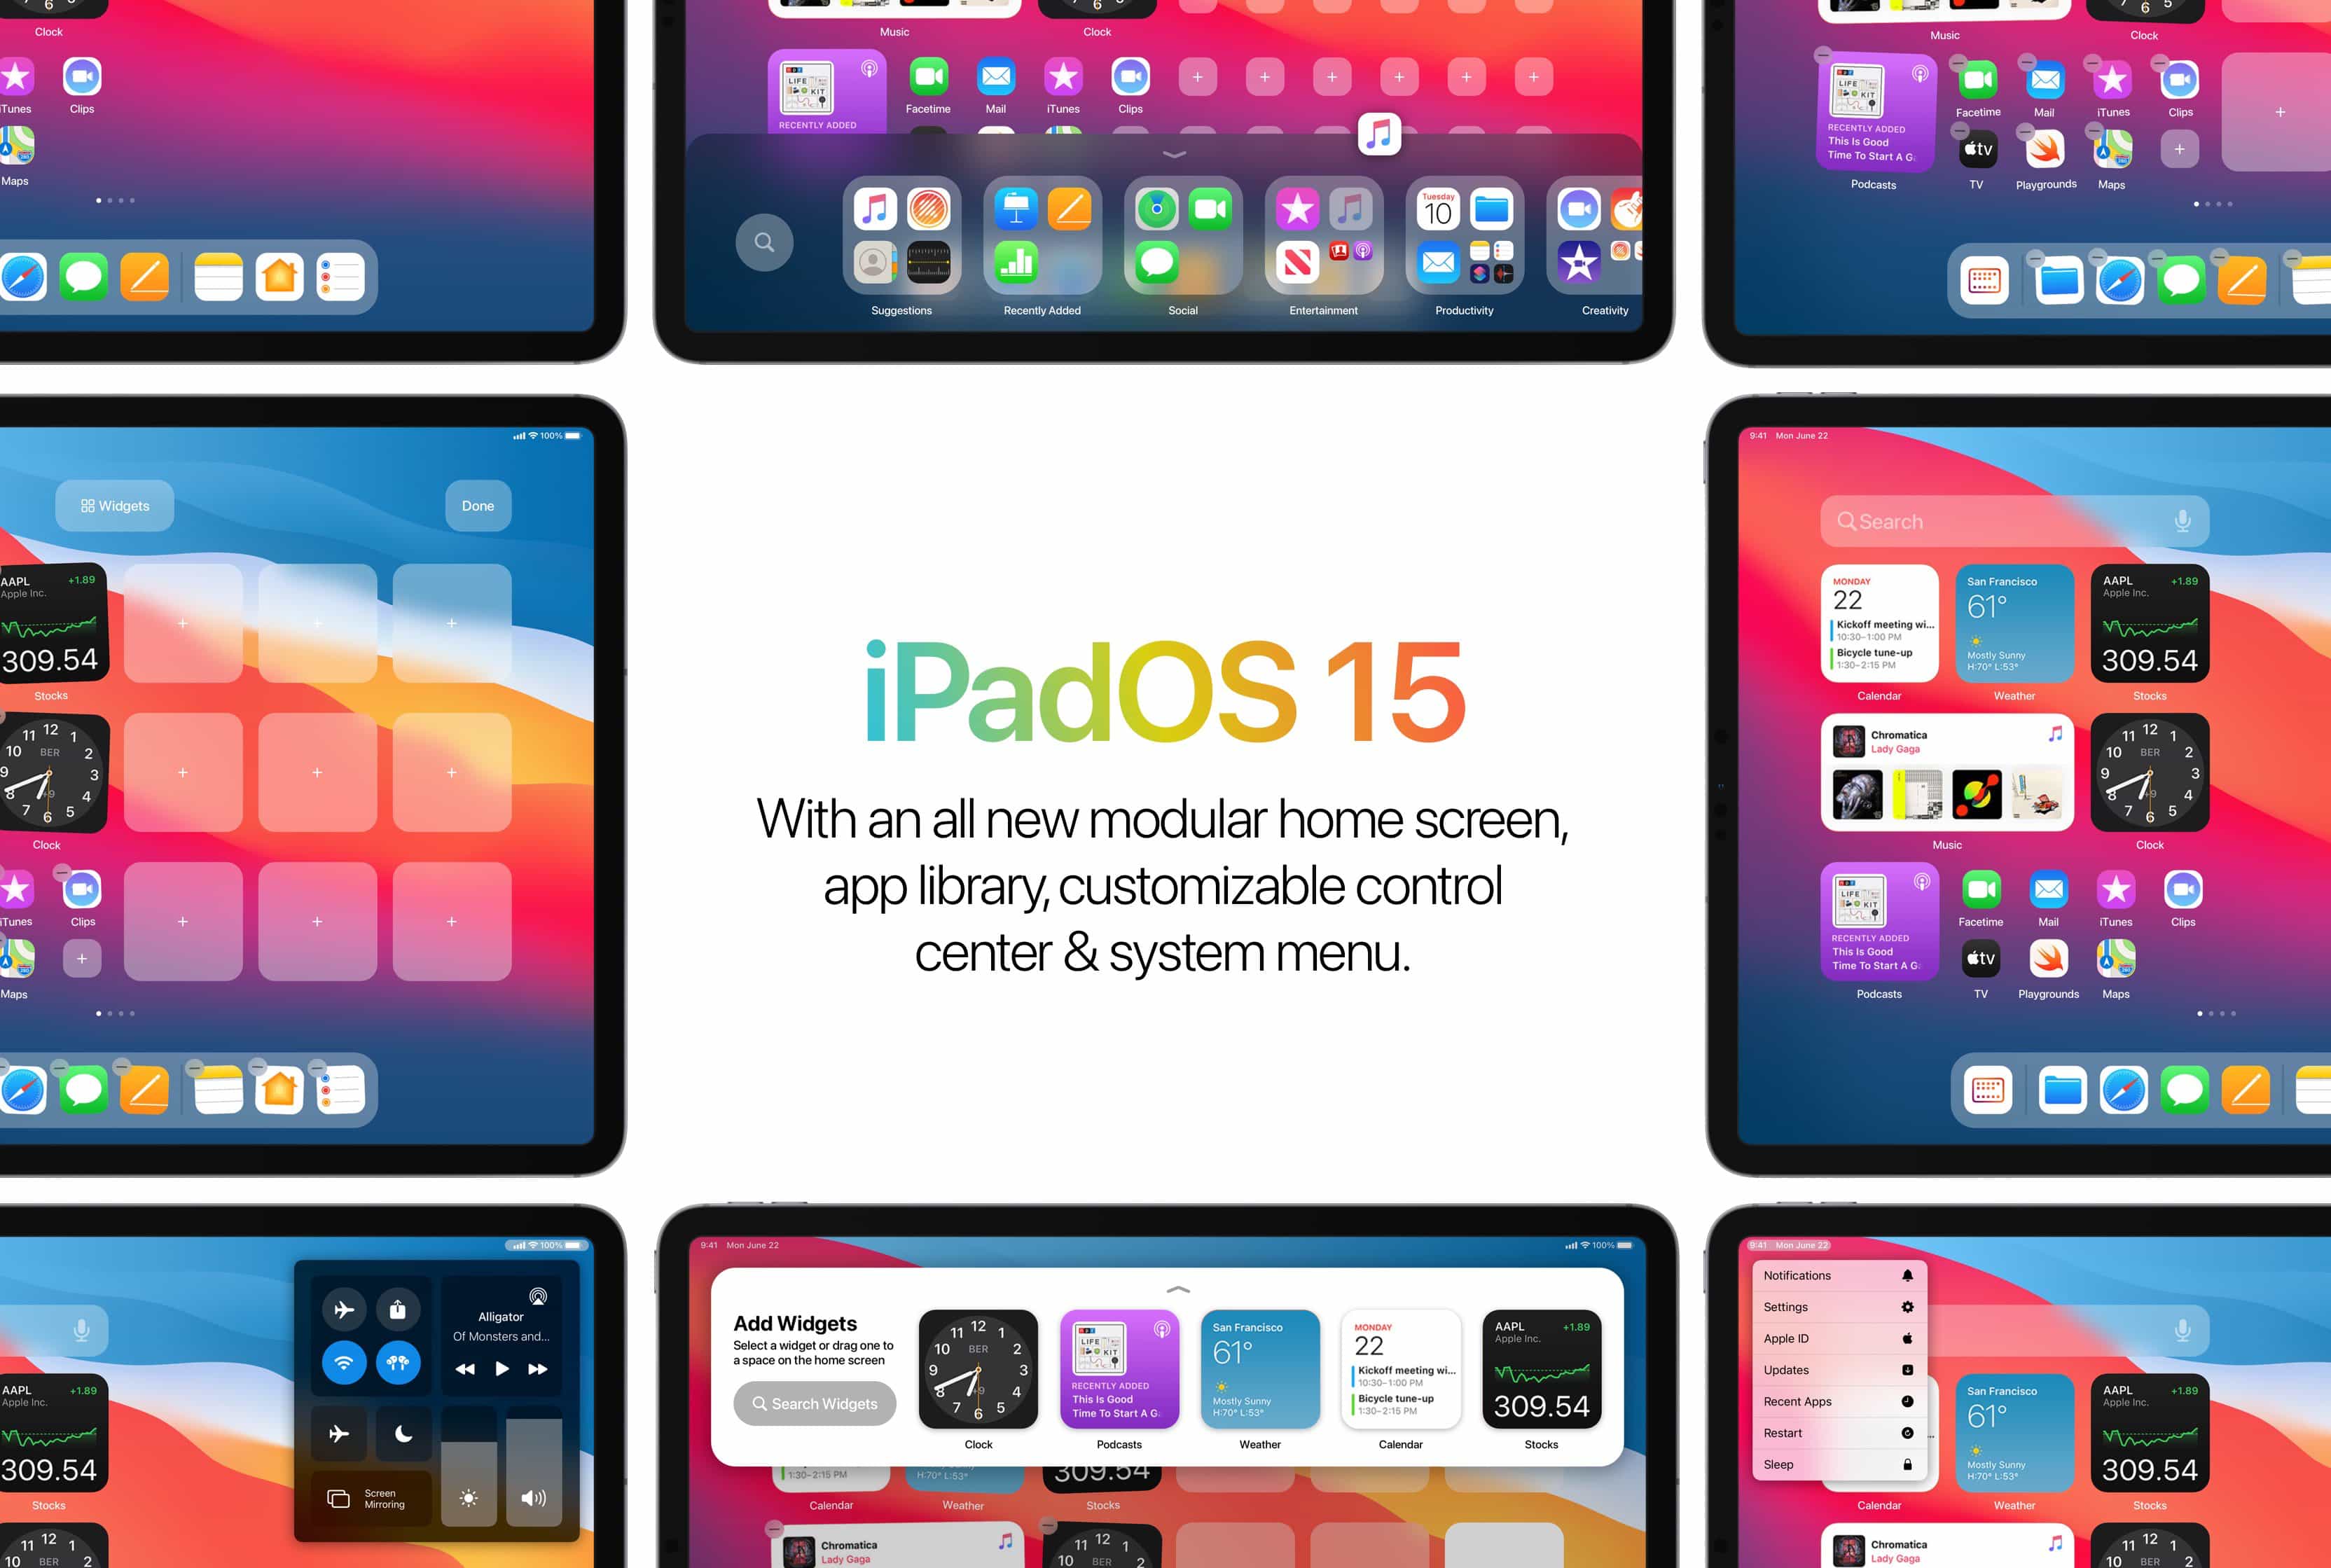 iPadOS 15 offers all-new multitasking experience and much more